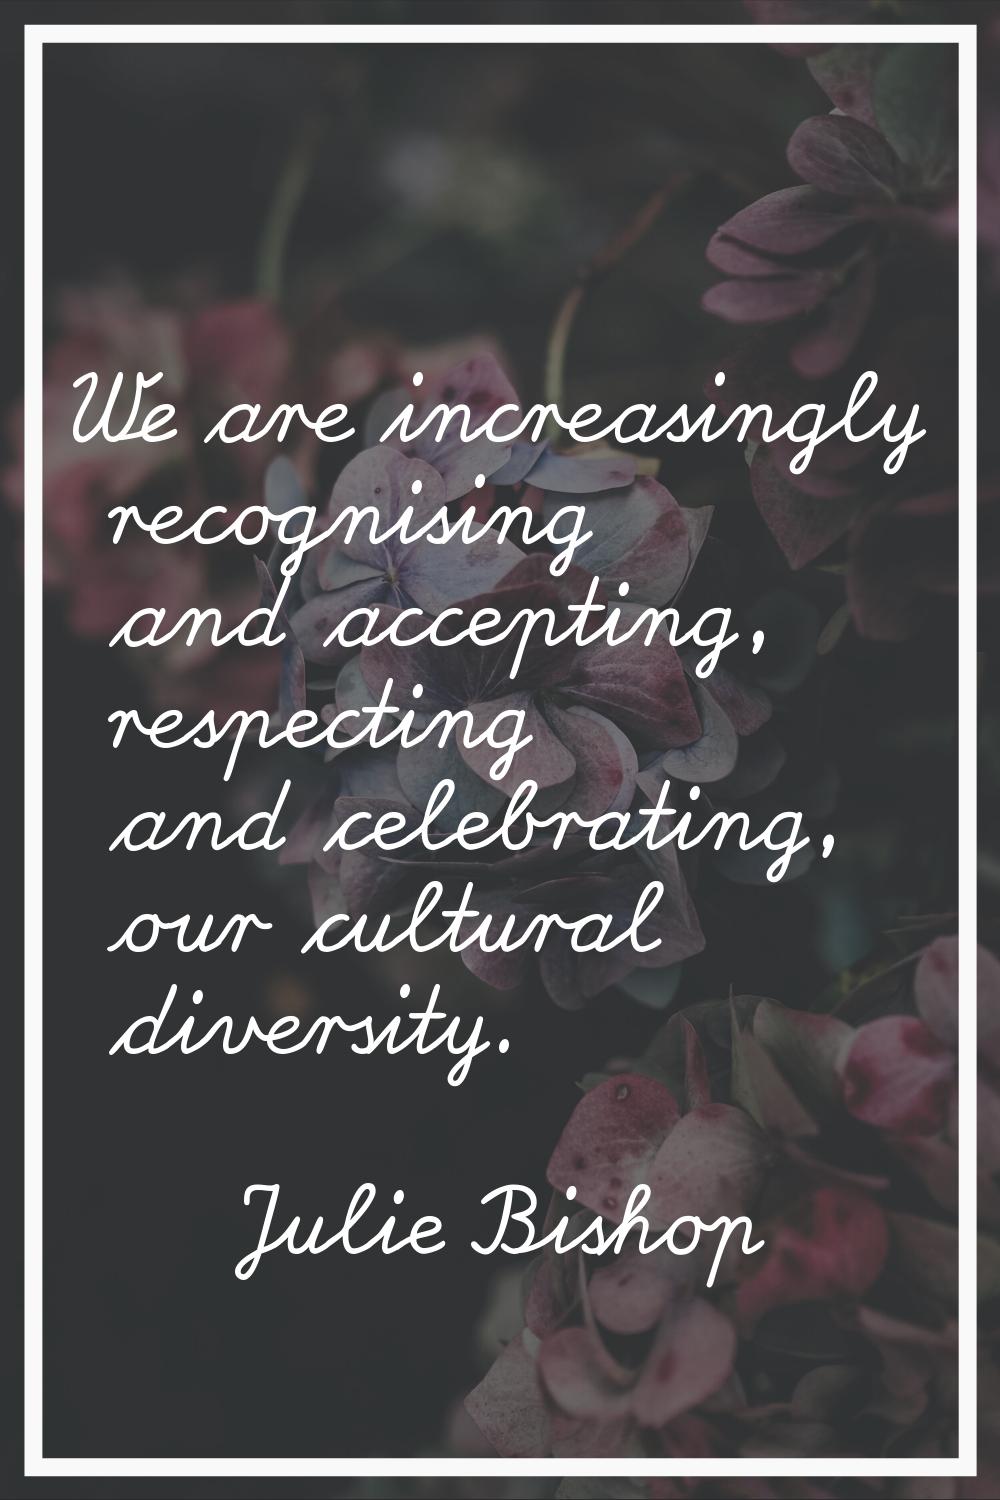 We are increasingly recognising and accepting, respecting and celebrating, our cultural diversity.